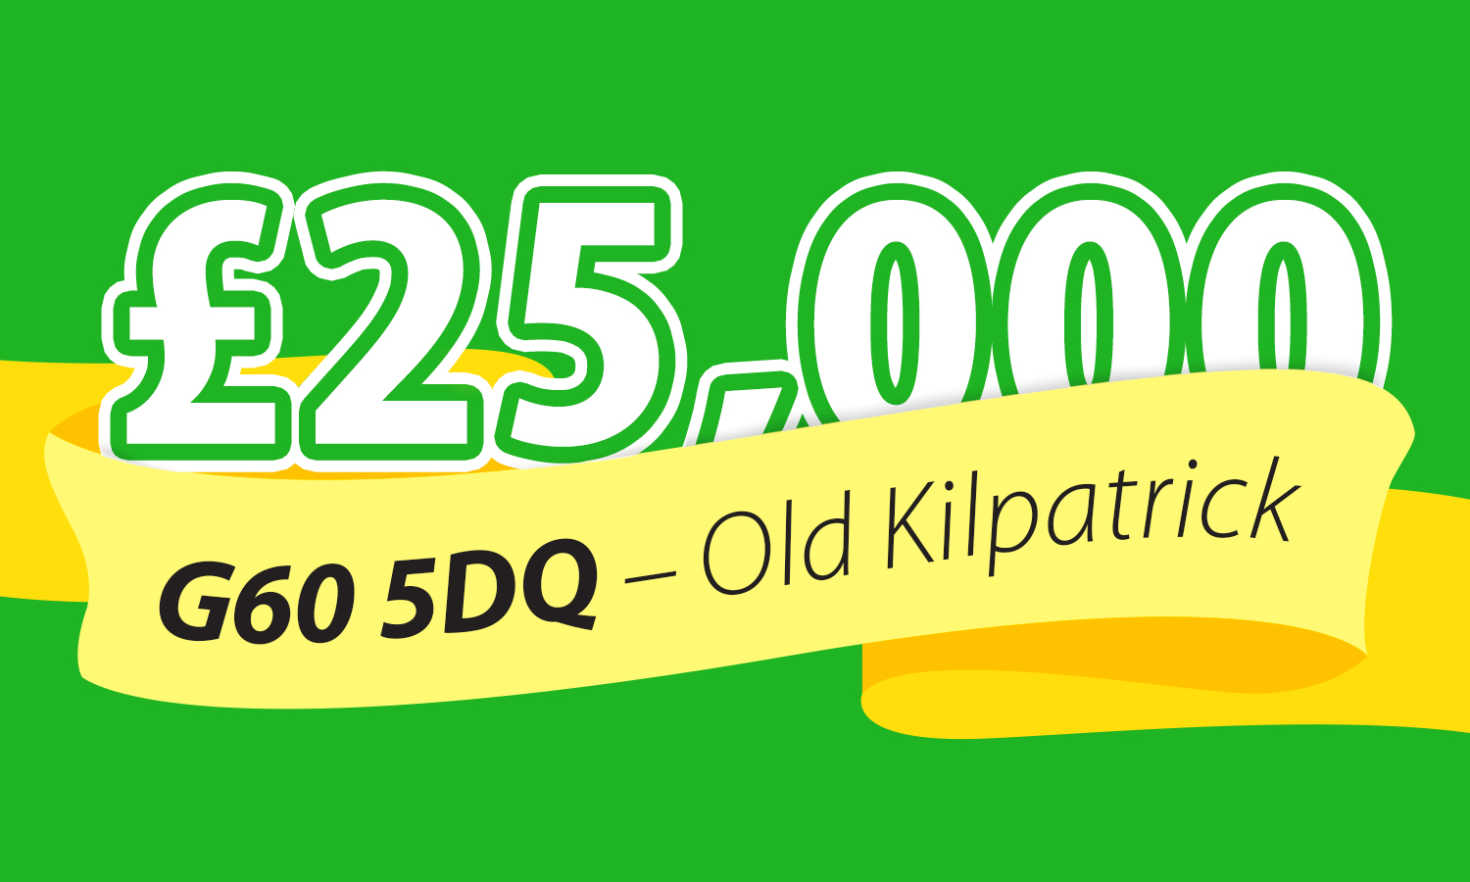 Two lucky winners scooped £25,000 each in Old Kilpatrick this weekend